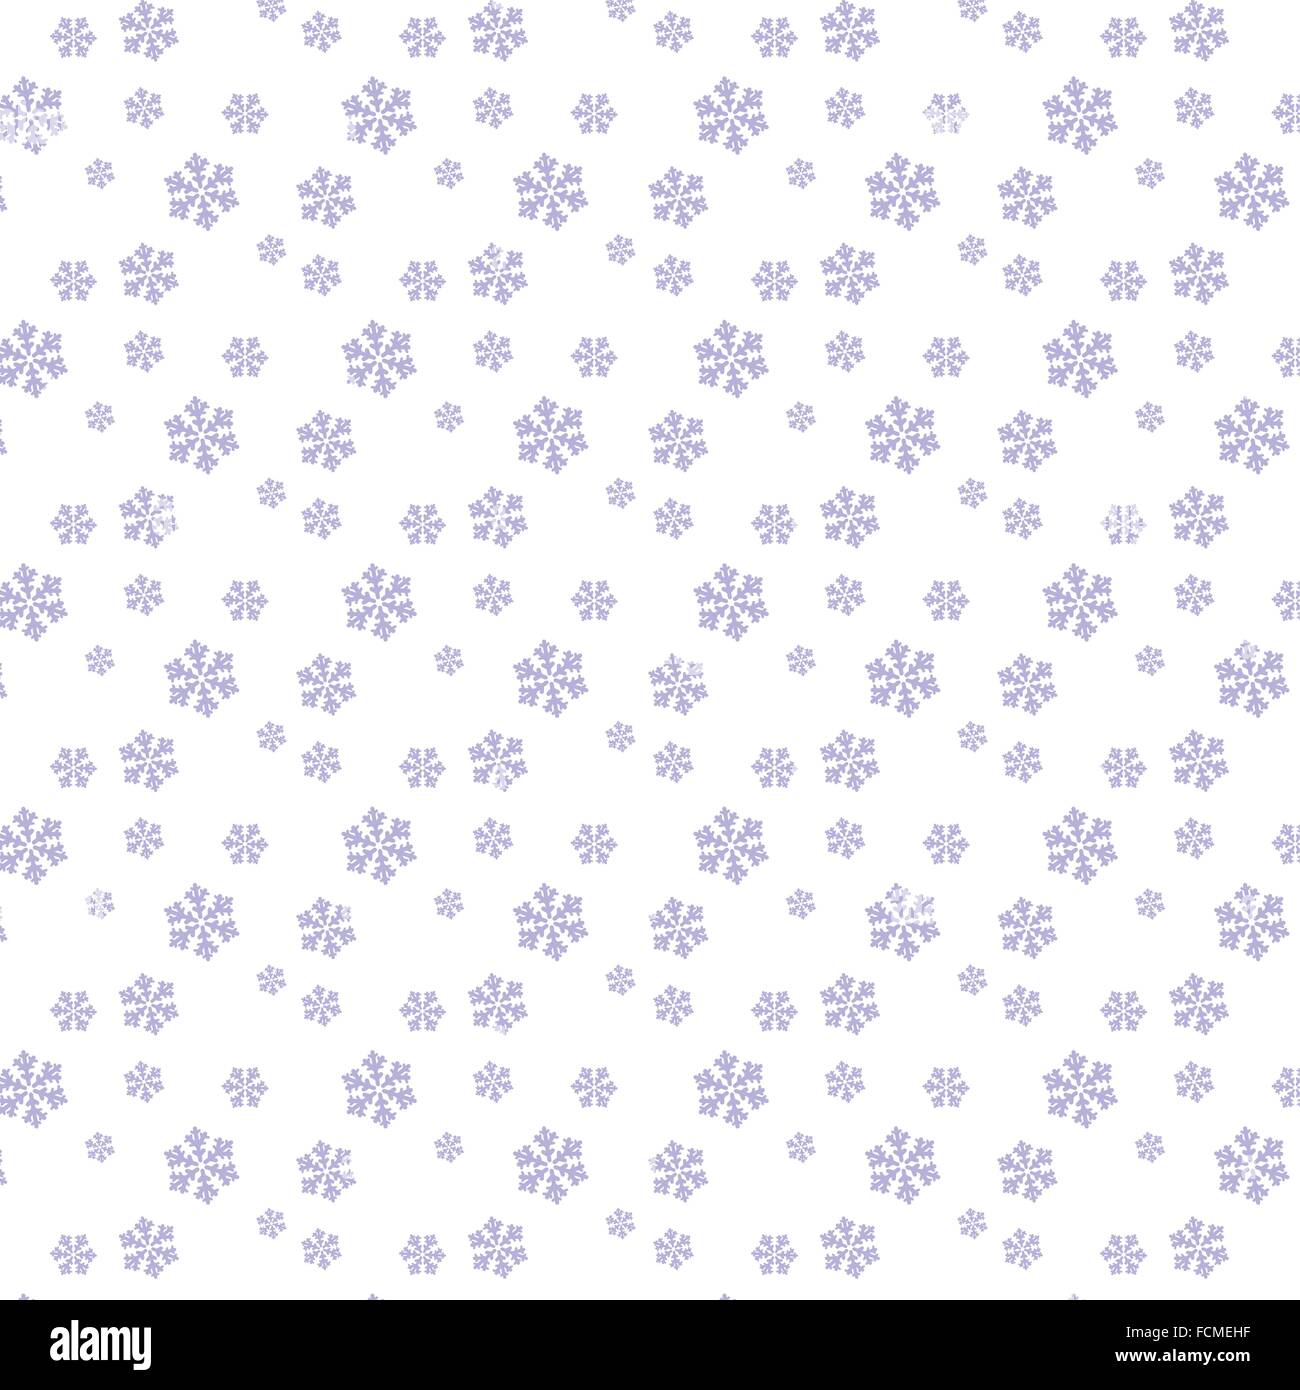 White Craft Paper Speckle Seamless Vector Stock Vector (Royalty Free)  1116810146, Shutterstock